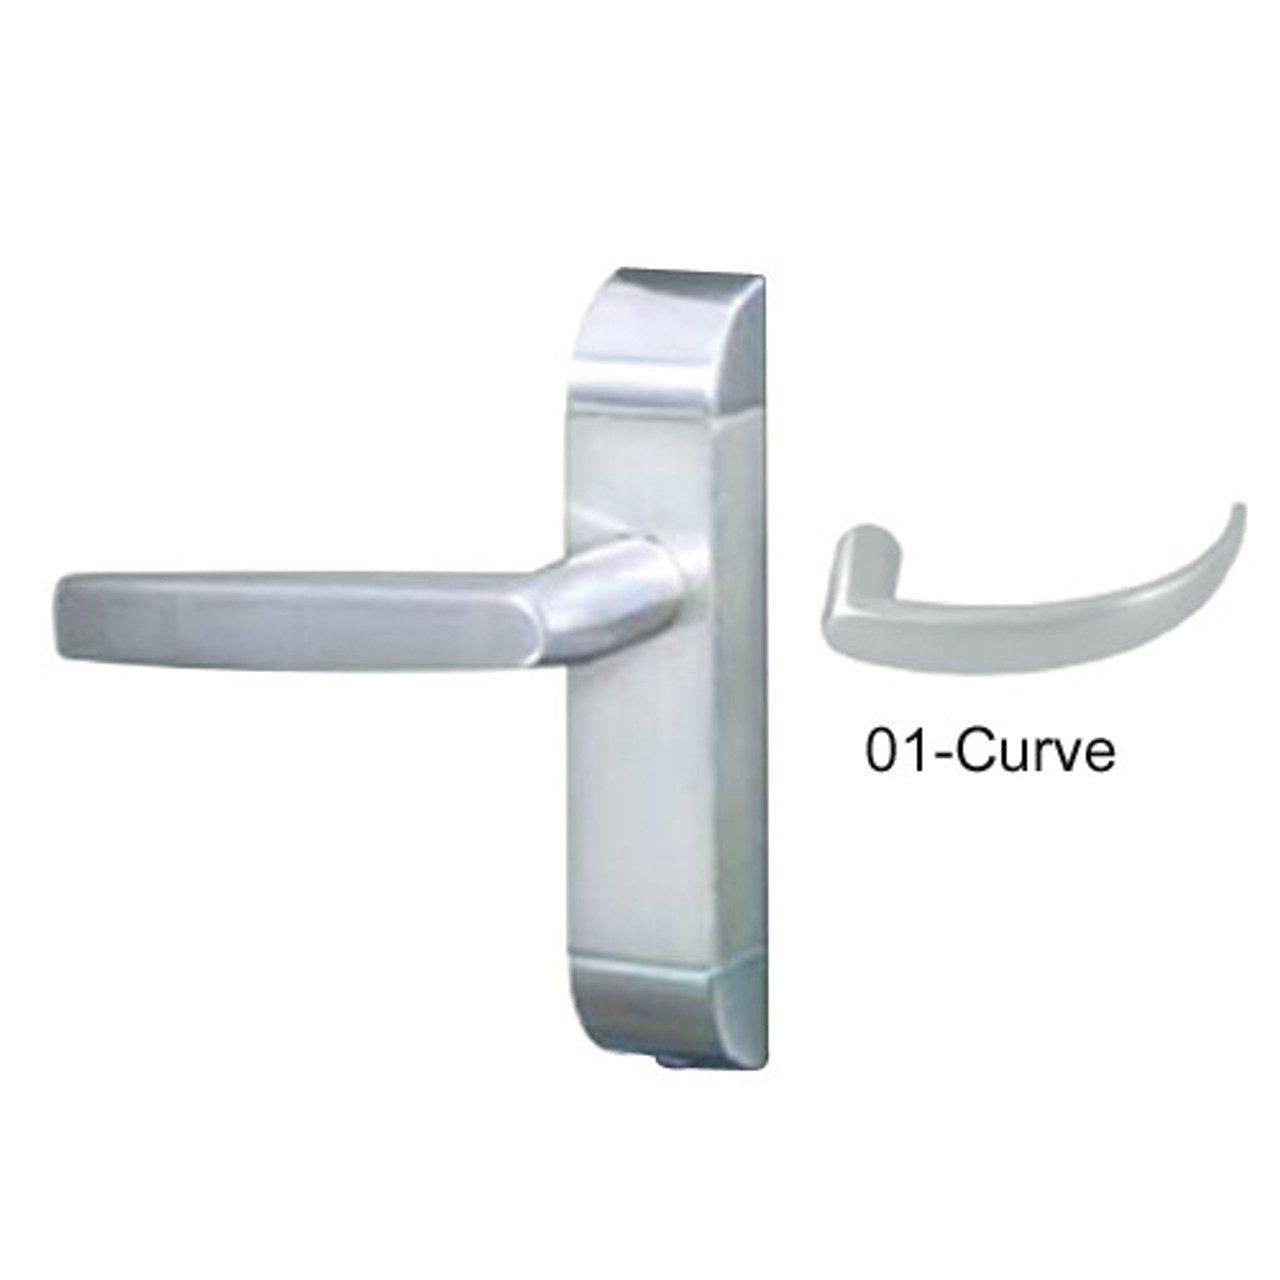 4600M-01-521-US32 Adams Rite Heavy Duty Curve Deadlatch Handles in Bright Stainless Finish